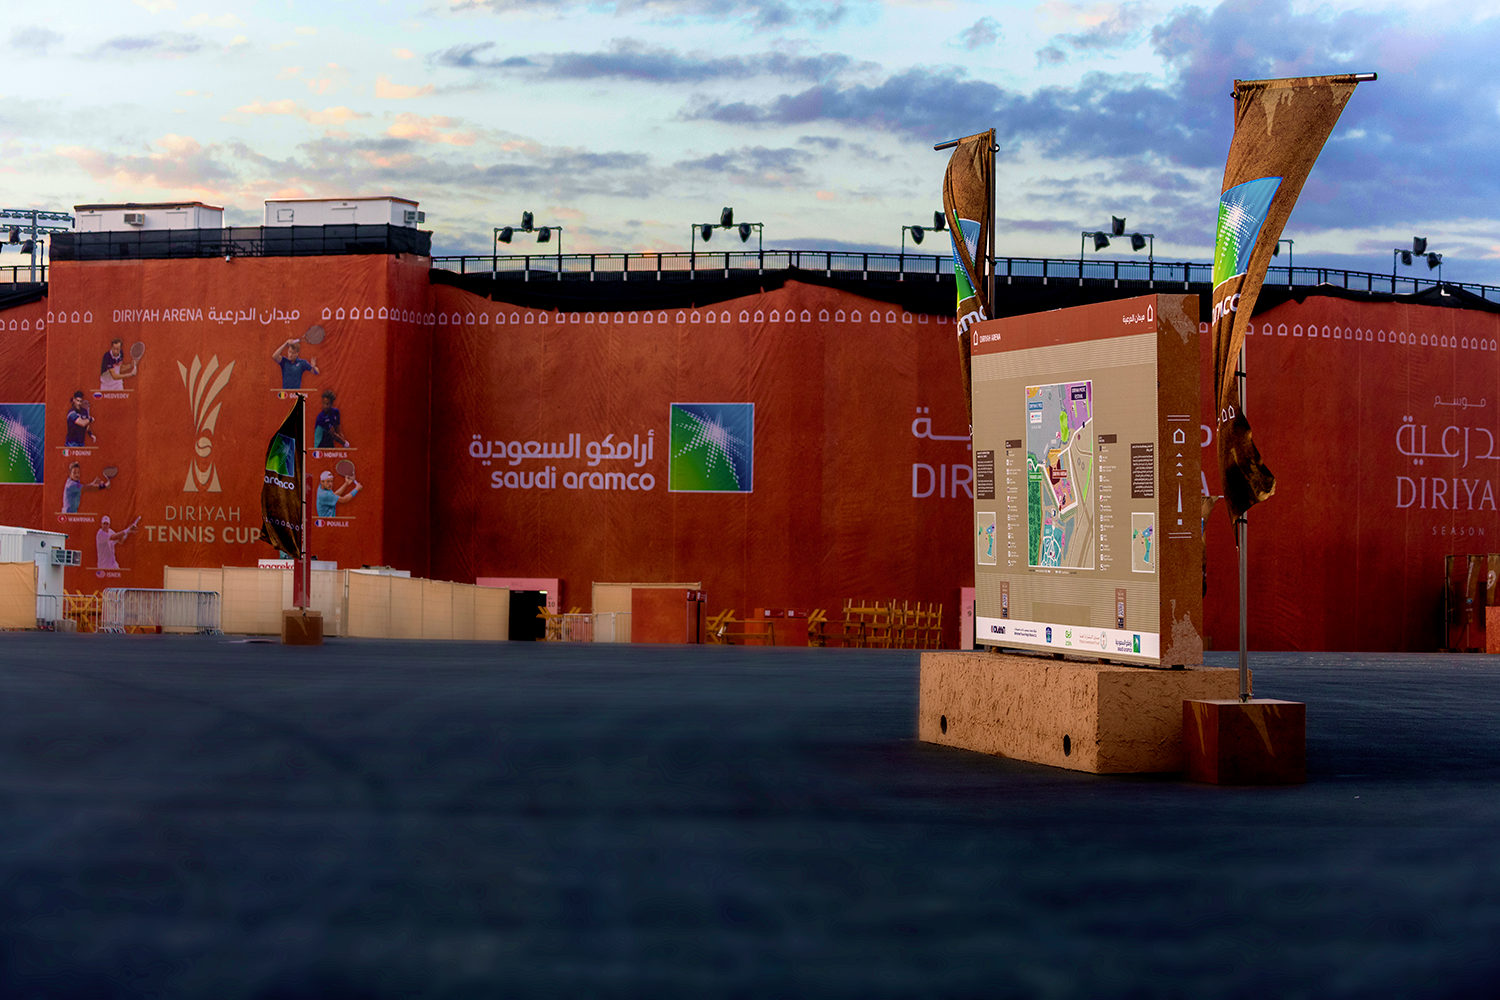 Mima's wayfinding map at Diriyah, with colourful elements on a brown background and installed on a brown podium, is to the right of the image. Orange advertisements line the wall in the background, and the sky is blue.